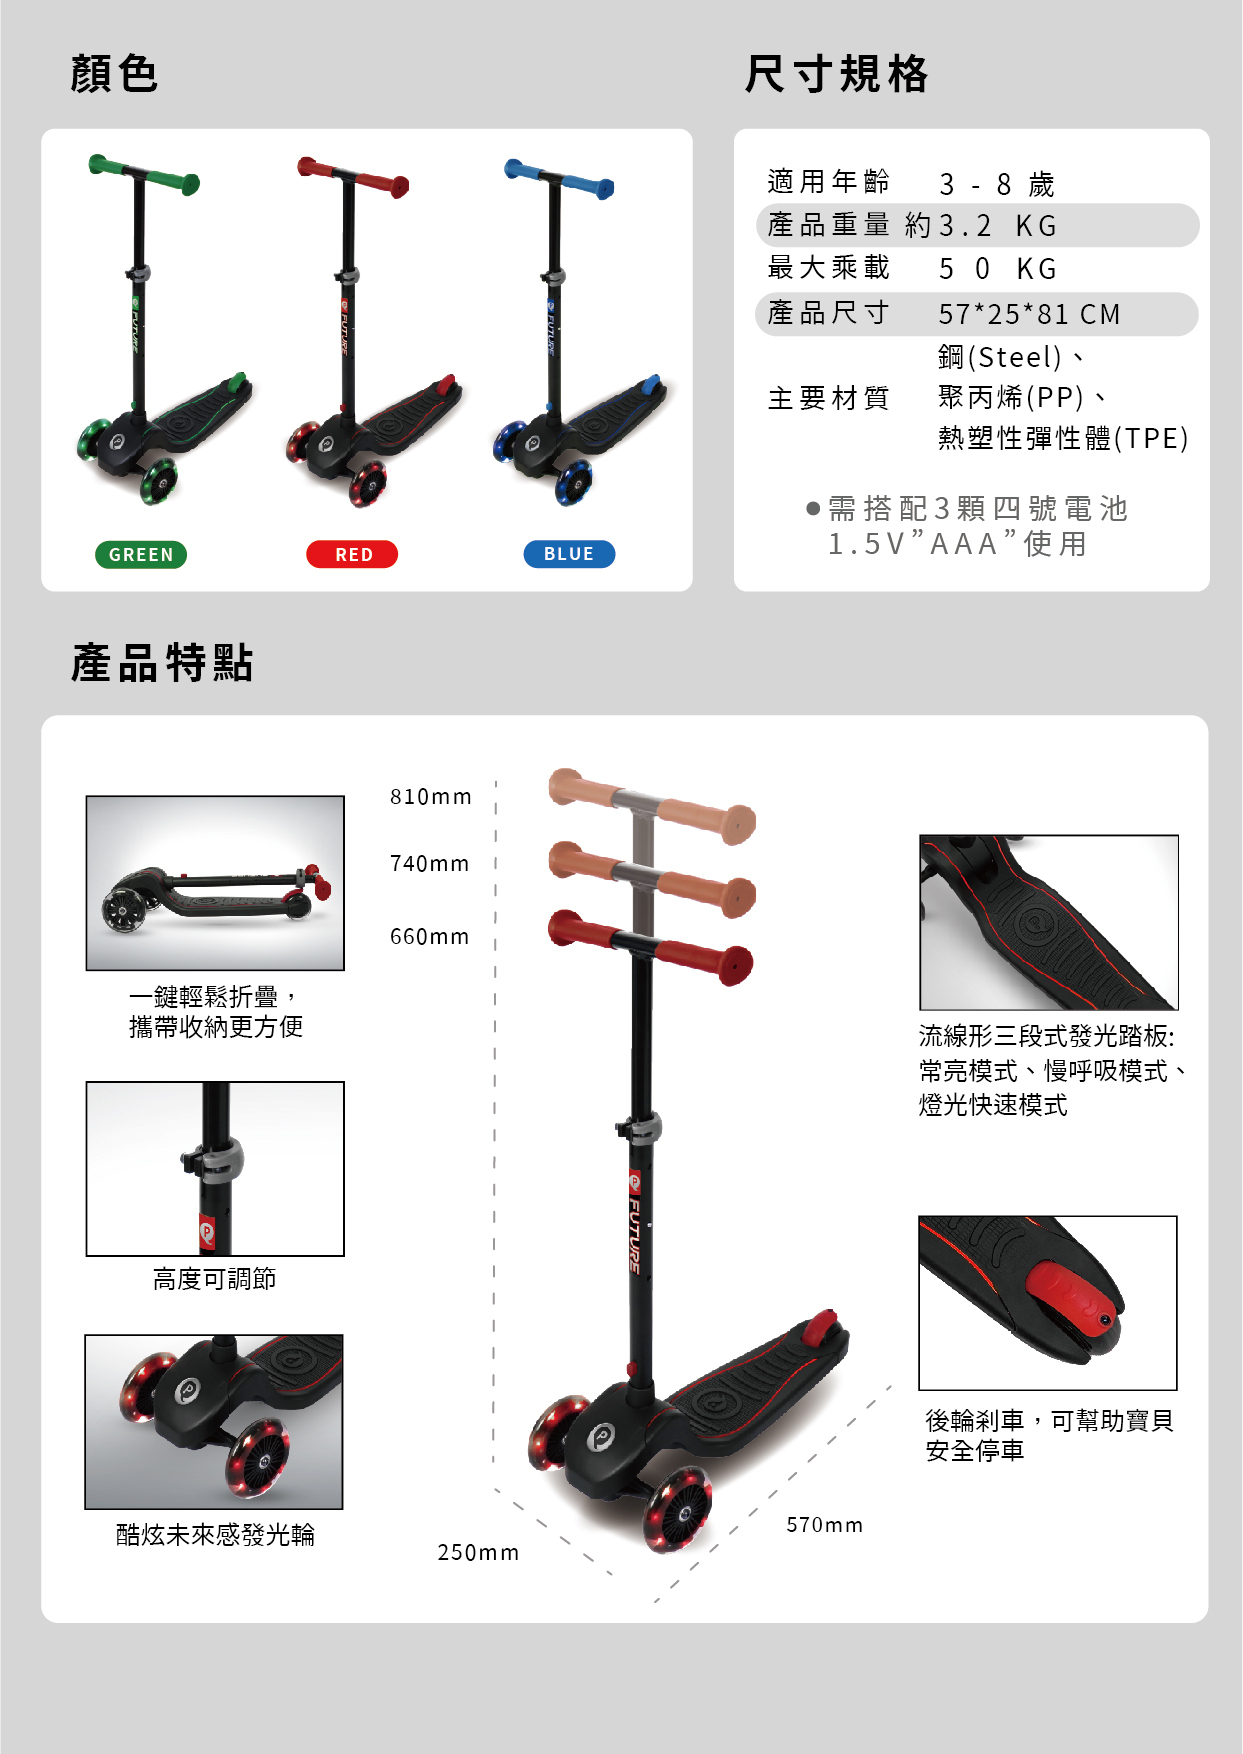 [Germany Q Play] ECO Future dazzling scooter - 3 colors available